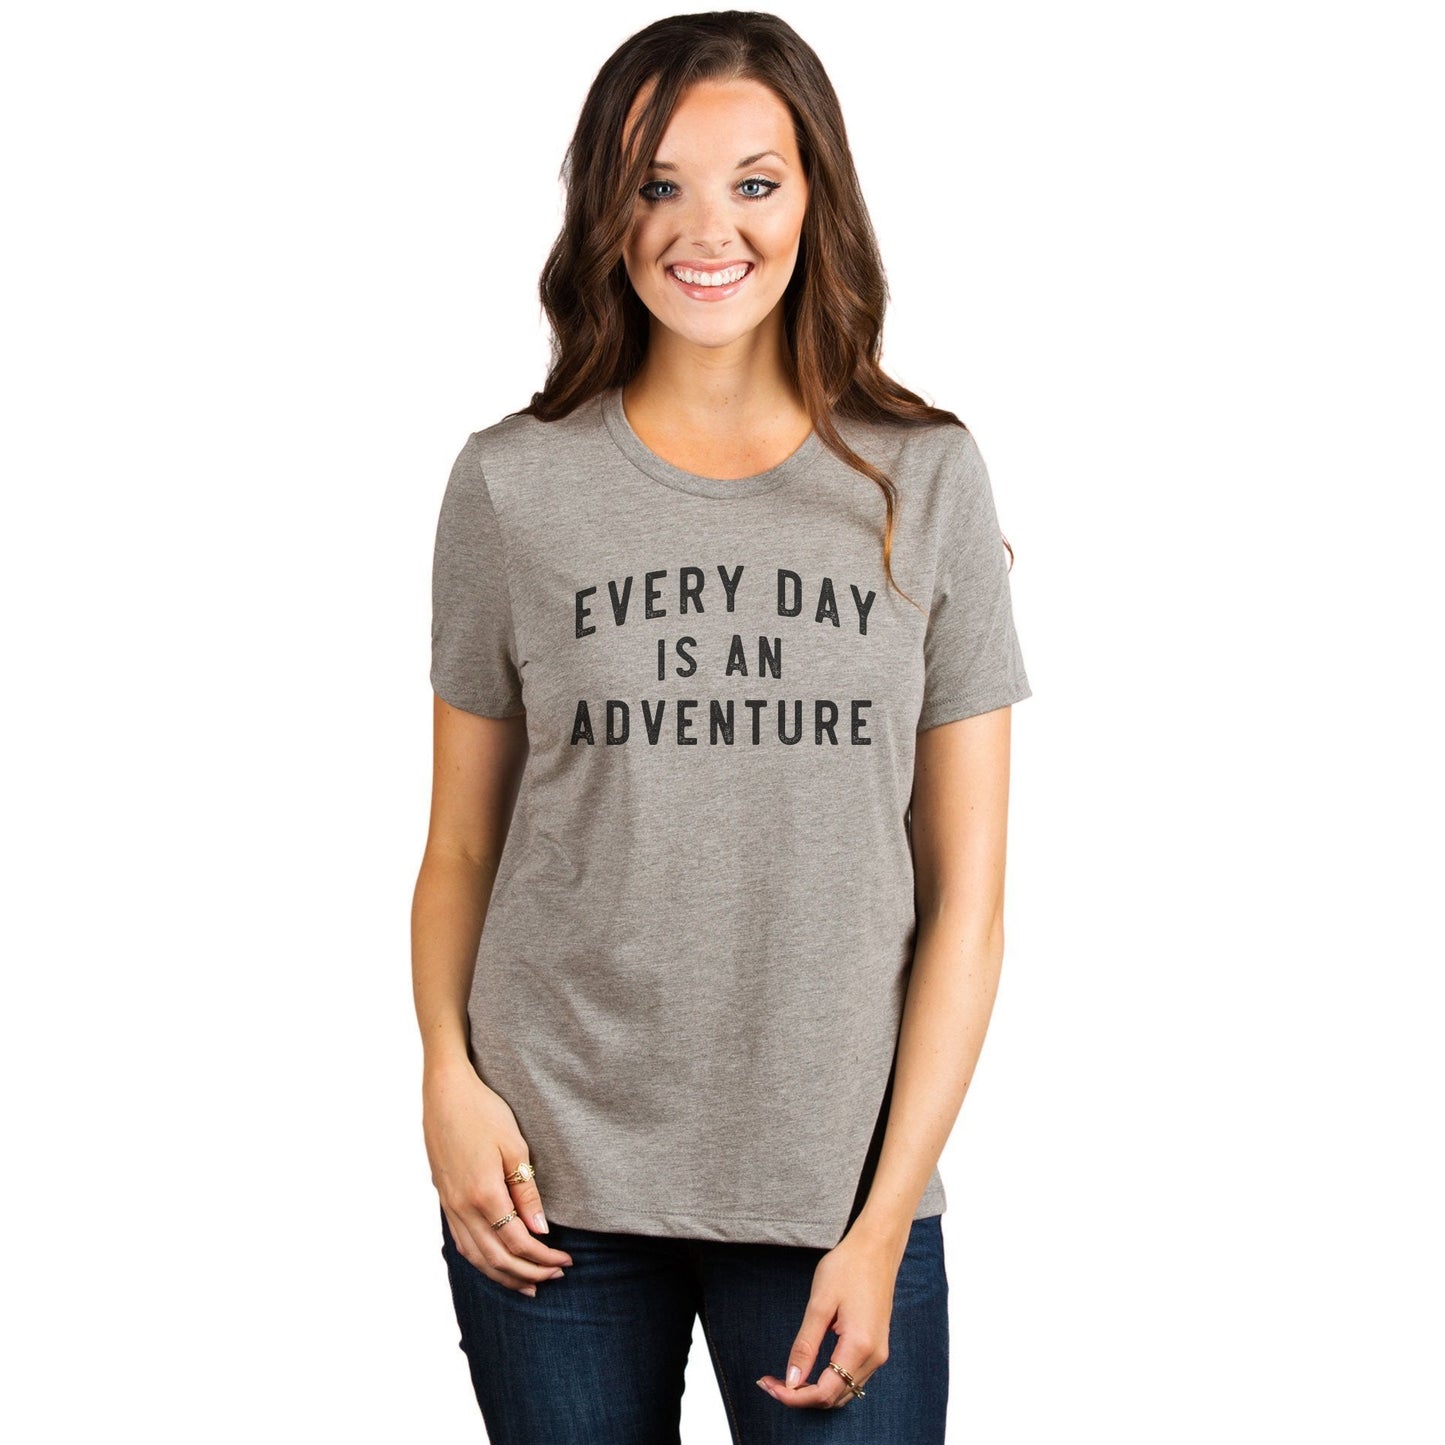 Everyday Is An Adventure Women's Relaxed Crewneck T-Shirt Top Tee Heather Tan Model
